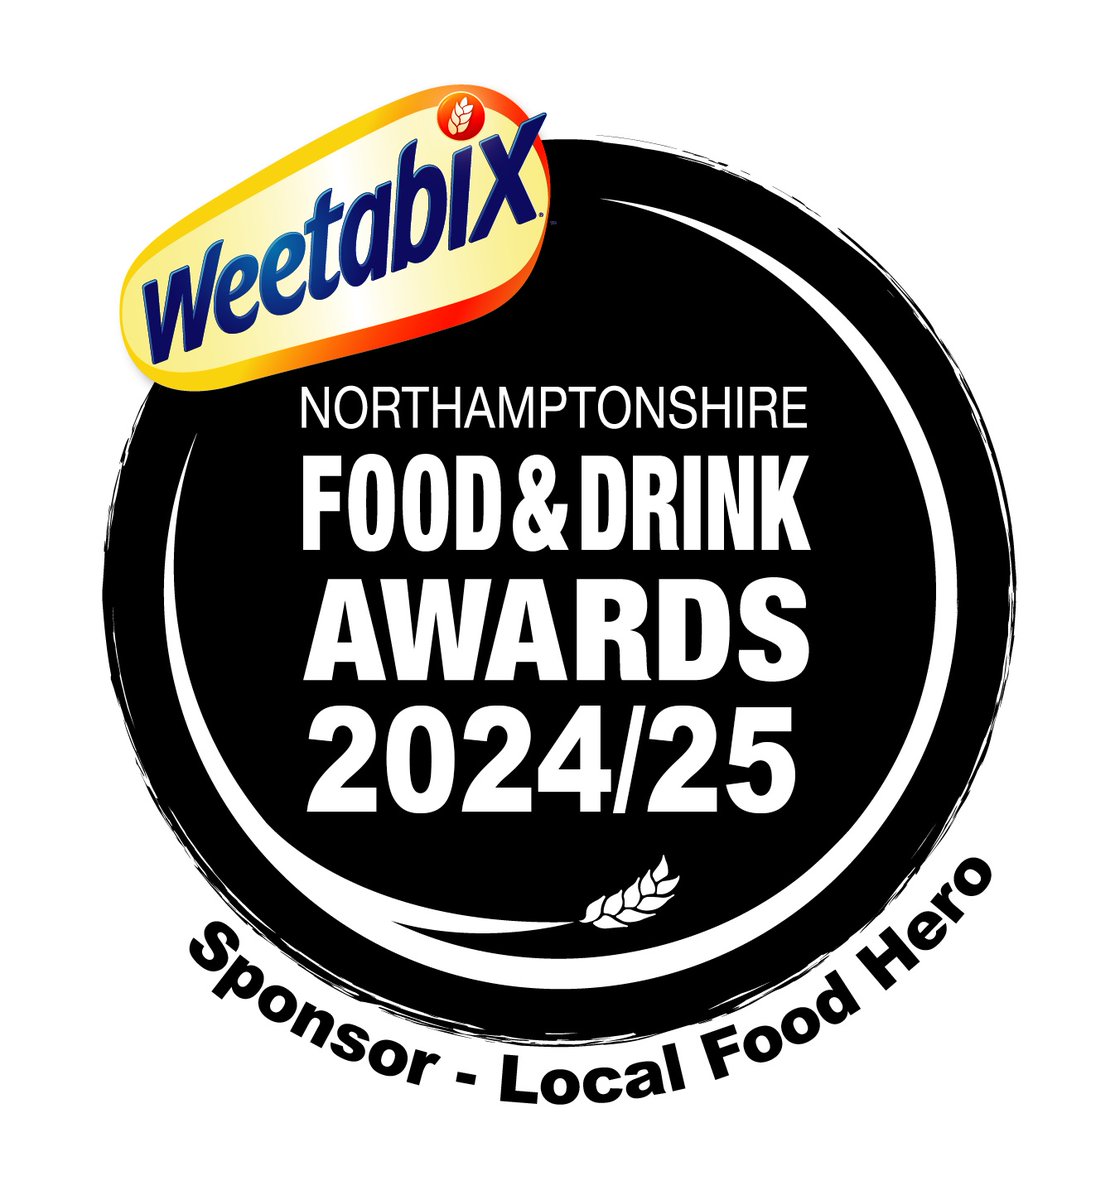 🍽️ Howes Percival is once again proudly supporting the Weetabix Northamptonshire Food & Drink Awards 🏆 👉 For more information about the awards and how to enter, visit lnkd.in/eZDB9ANV #FoodAndDrink #NorthamptonshireAwards